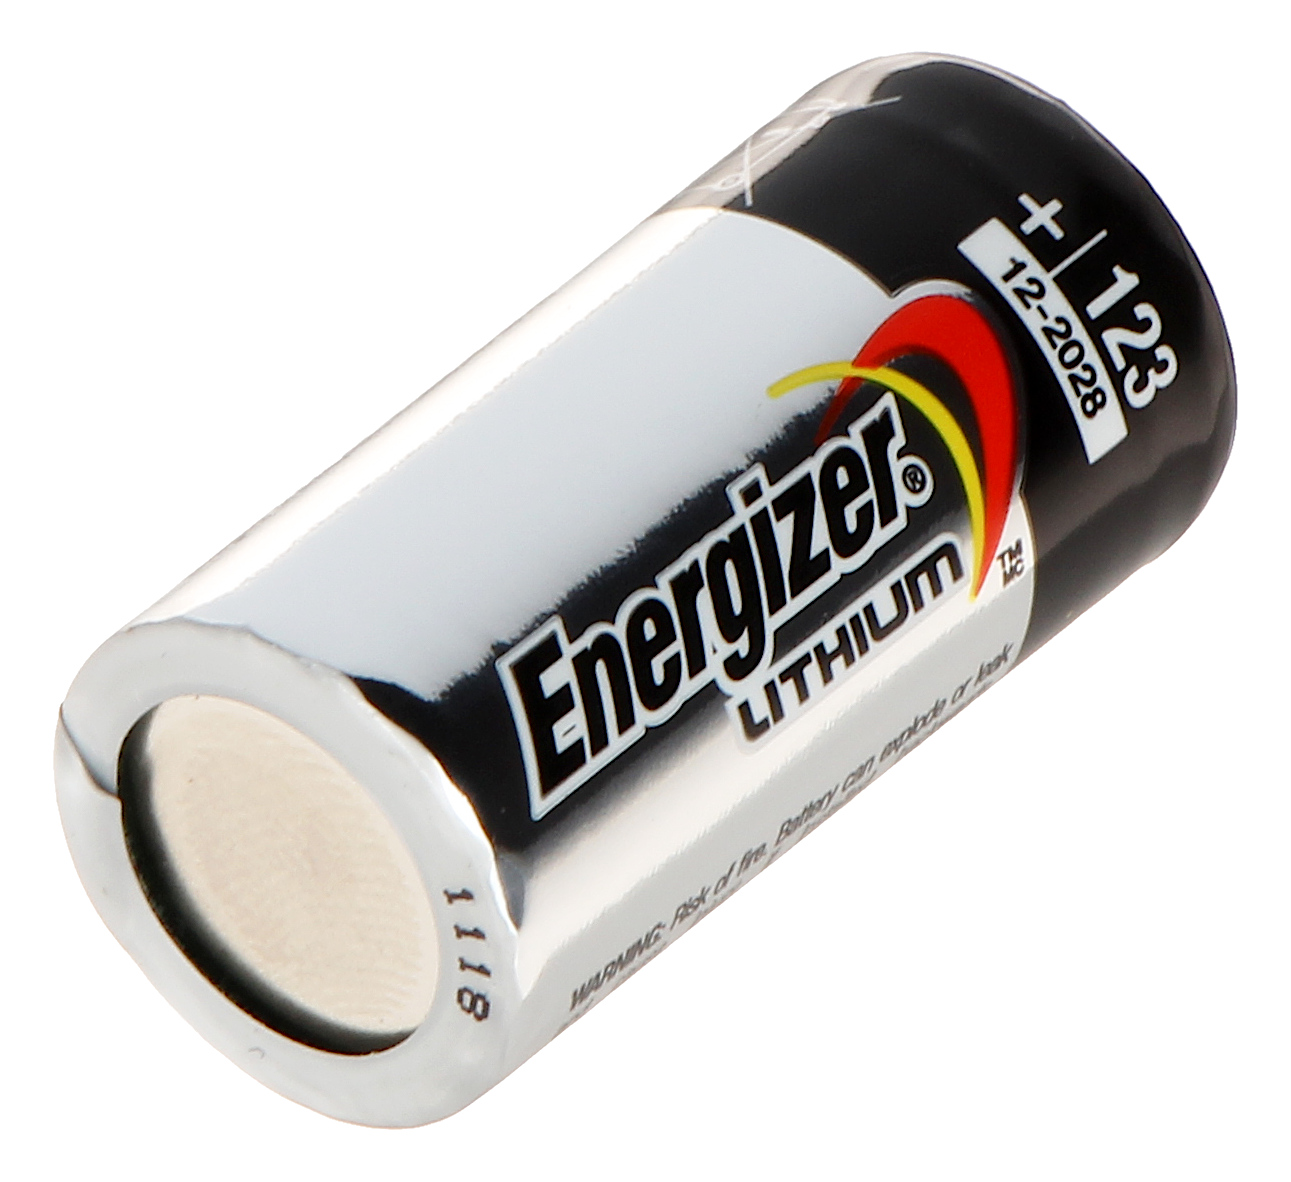 LITHIUM BATTERY BAT-CR123A/E 3 V CR123A ENERGIZER - Lithium and Other  Batteries - Delta